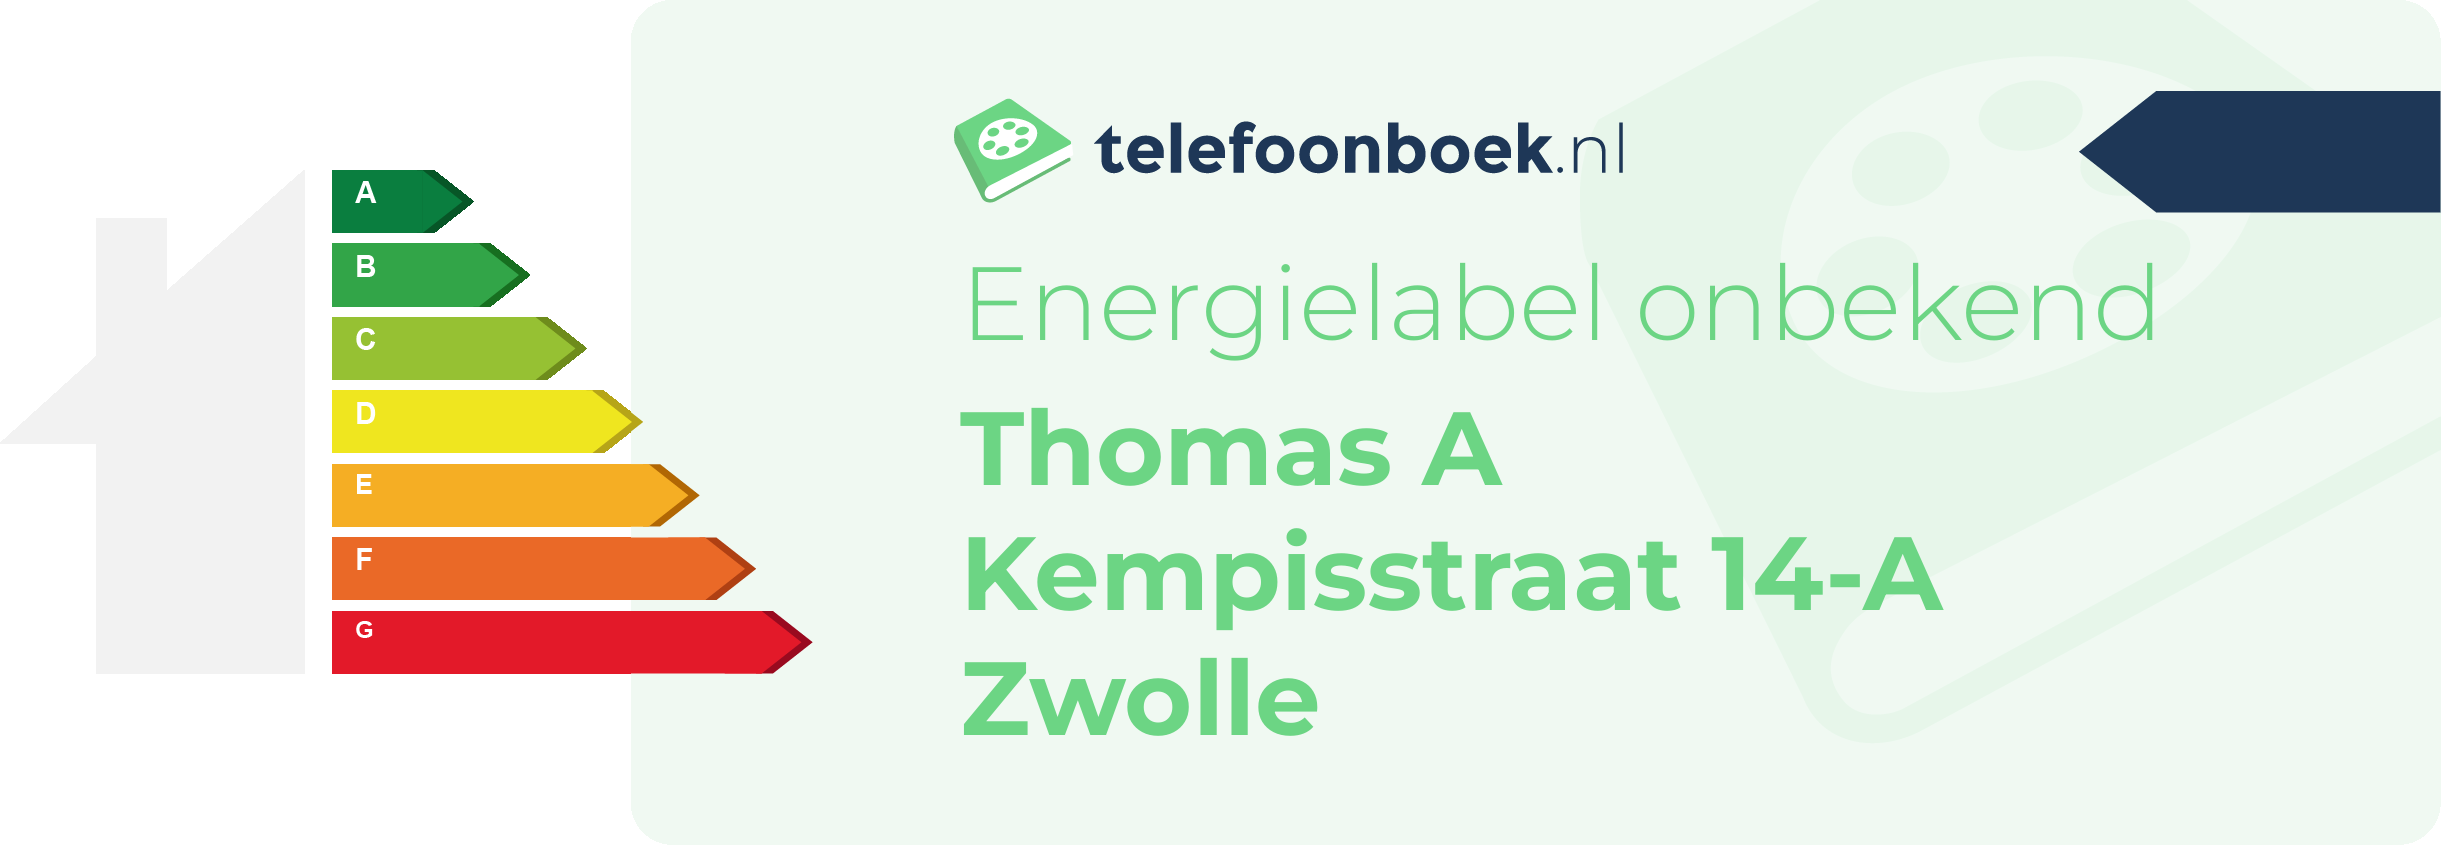 Energielabel Thomas A Kempisstraat 14-A Zwolle